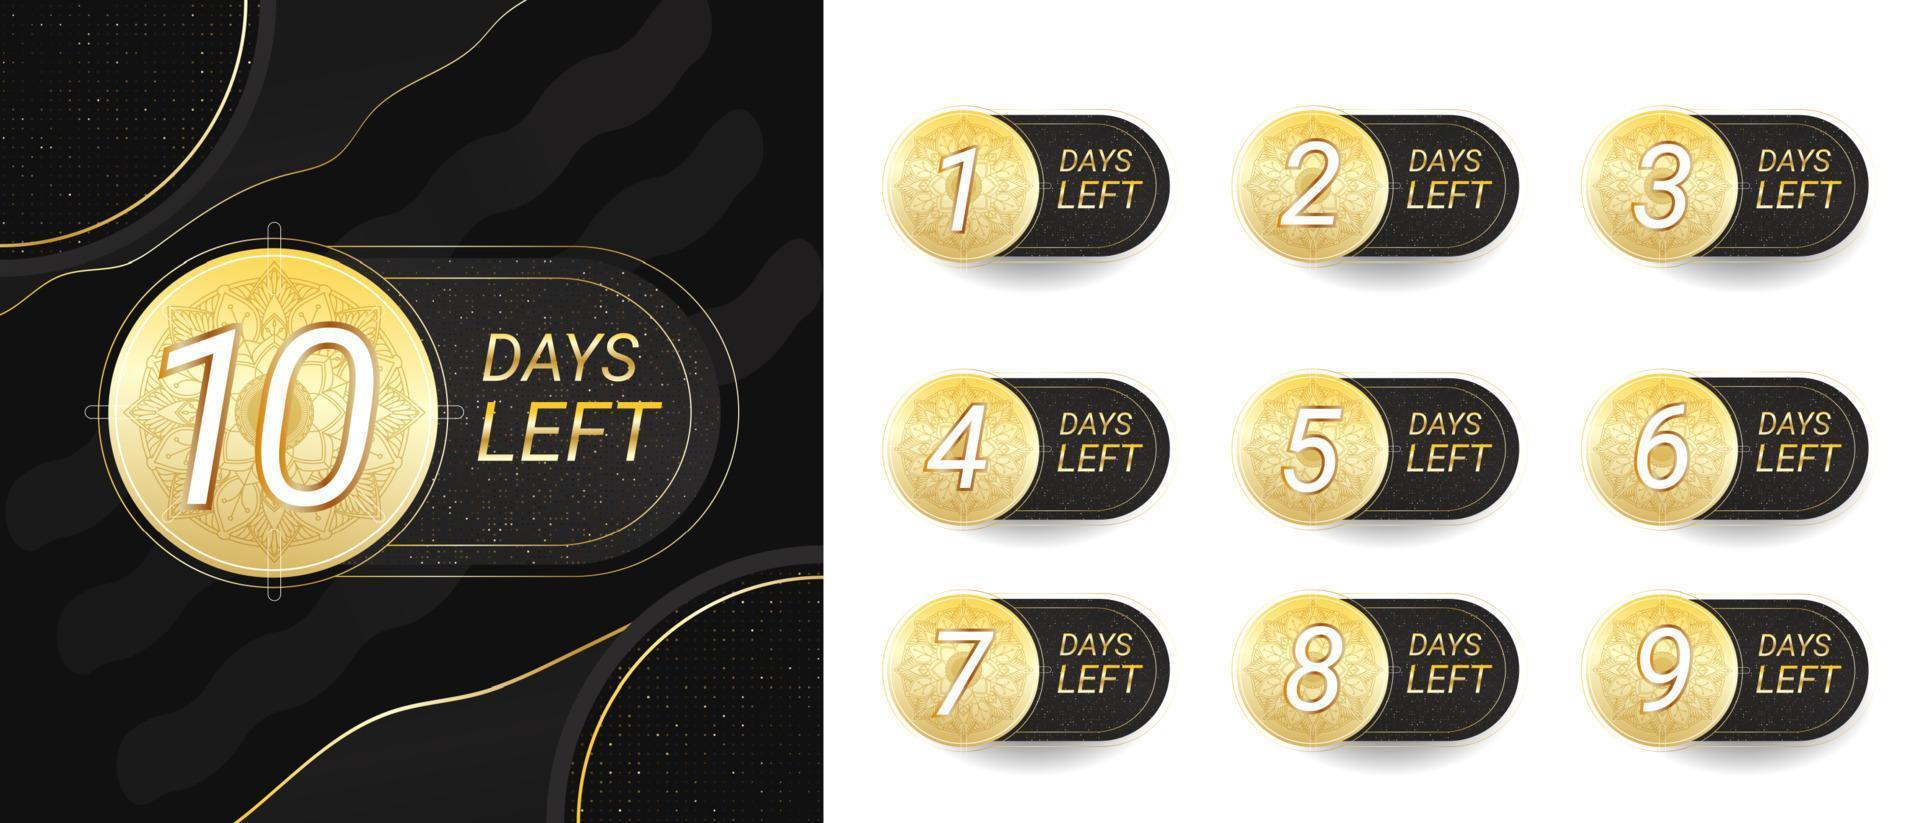 New Year Day Countdown Social Media Template vector